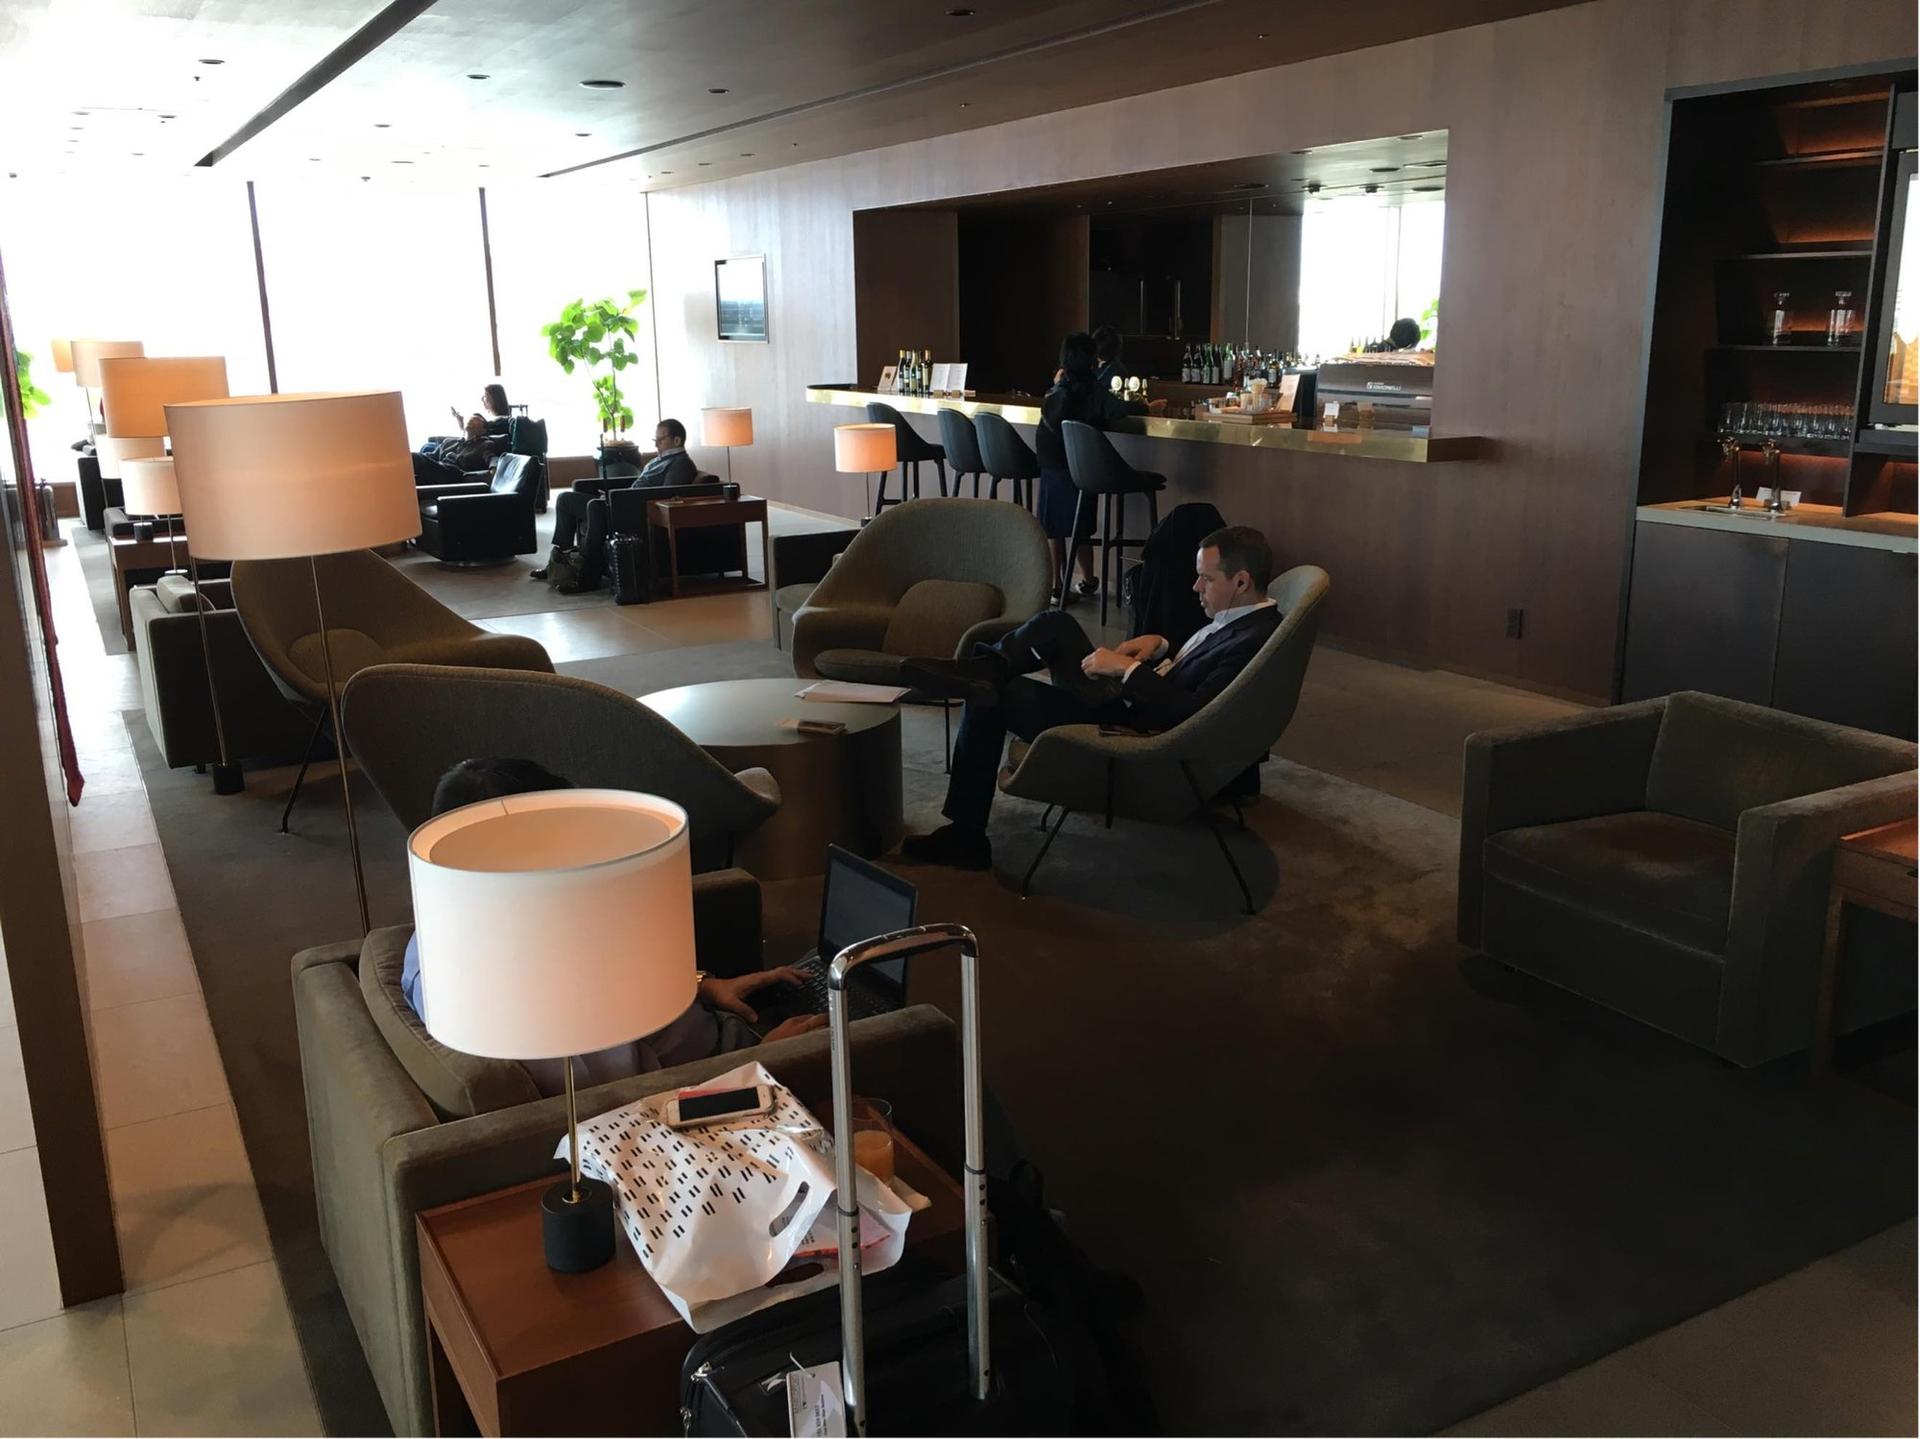 Cathay Pacific Lounge image 34 of 49